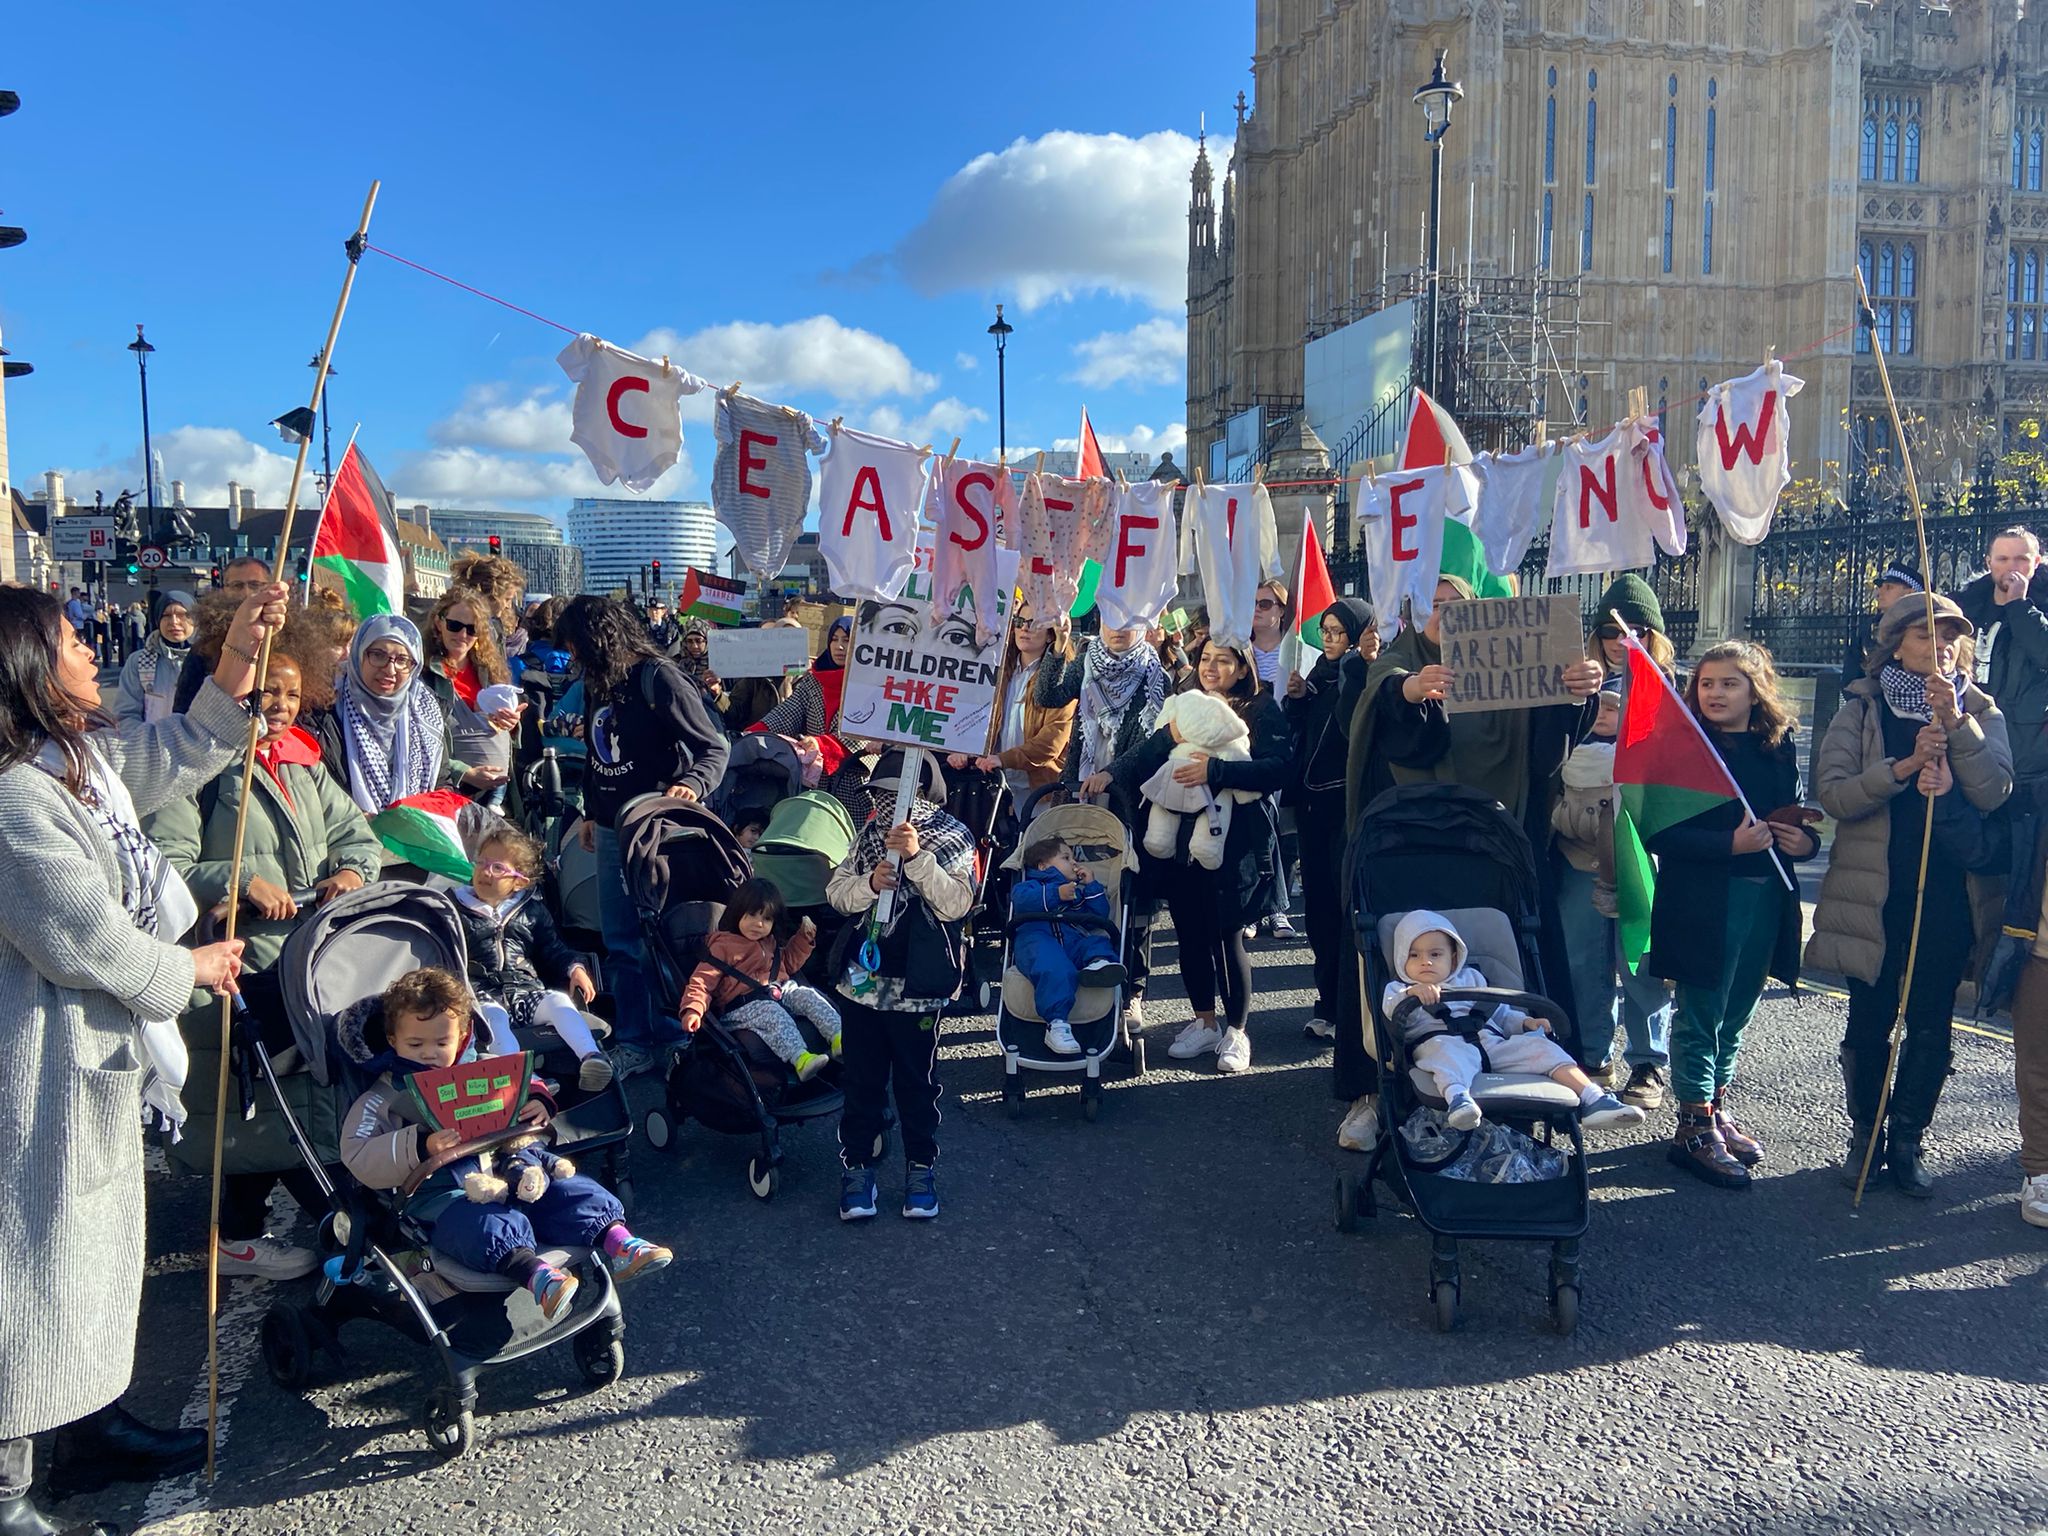 Mothers and children gather outside the UK parliament to demand a ceasefire.